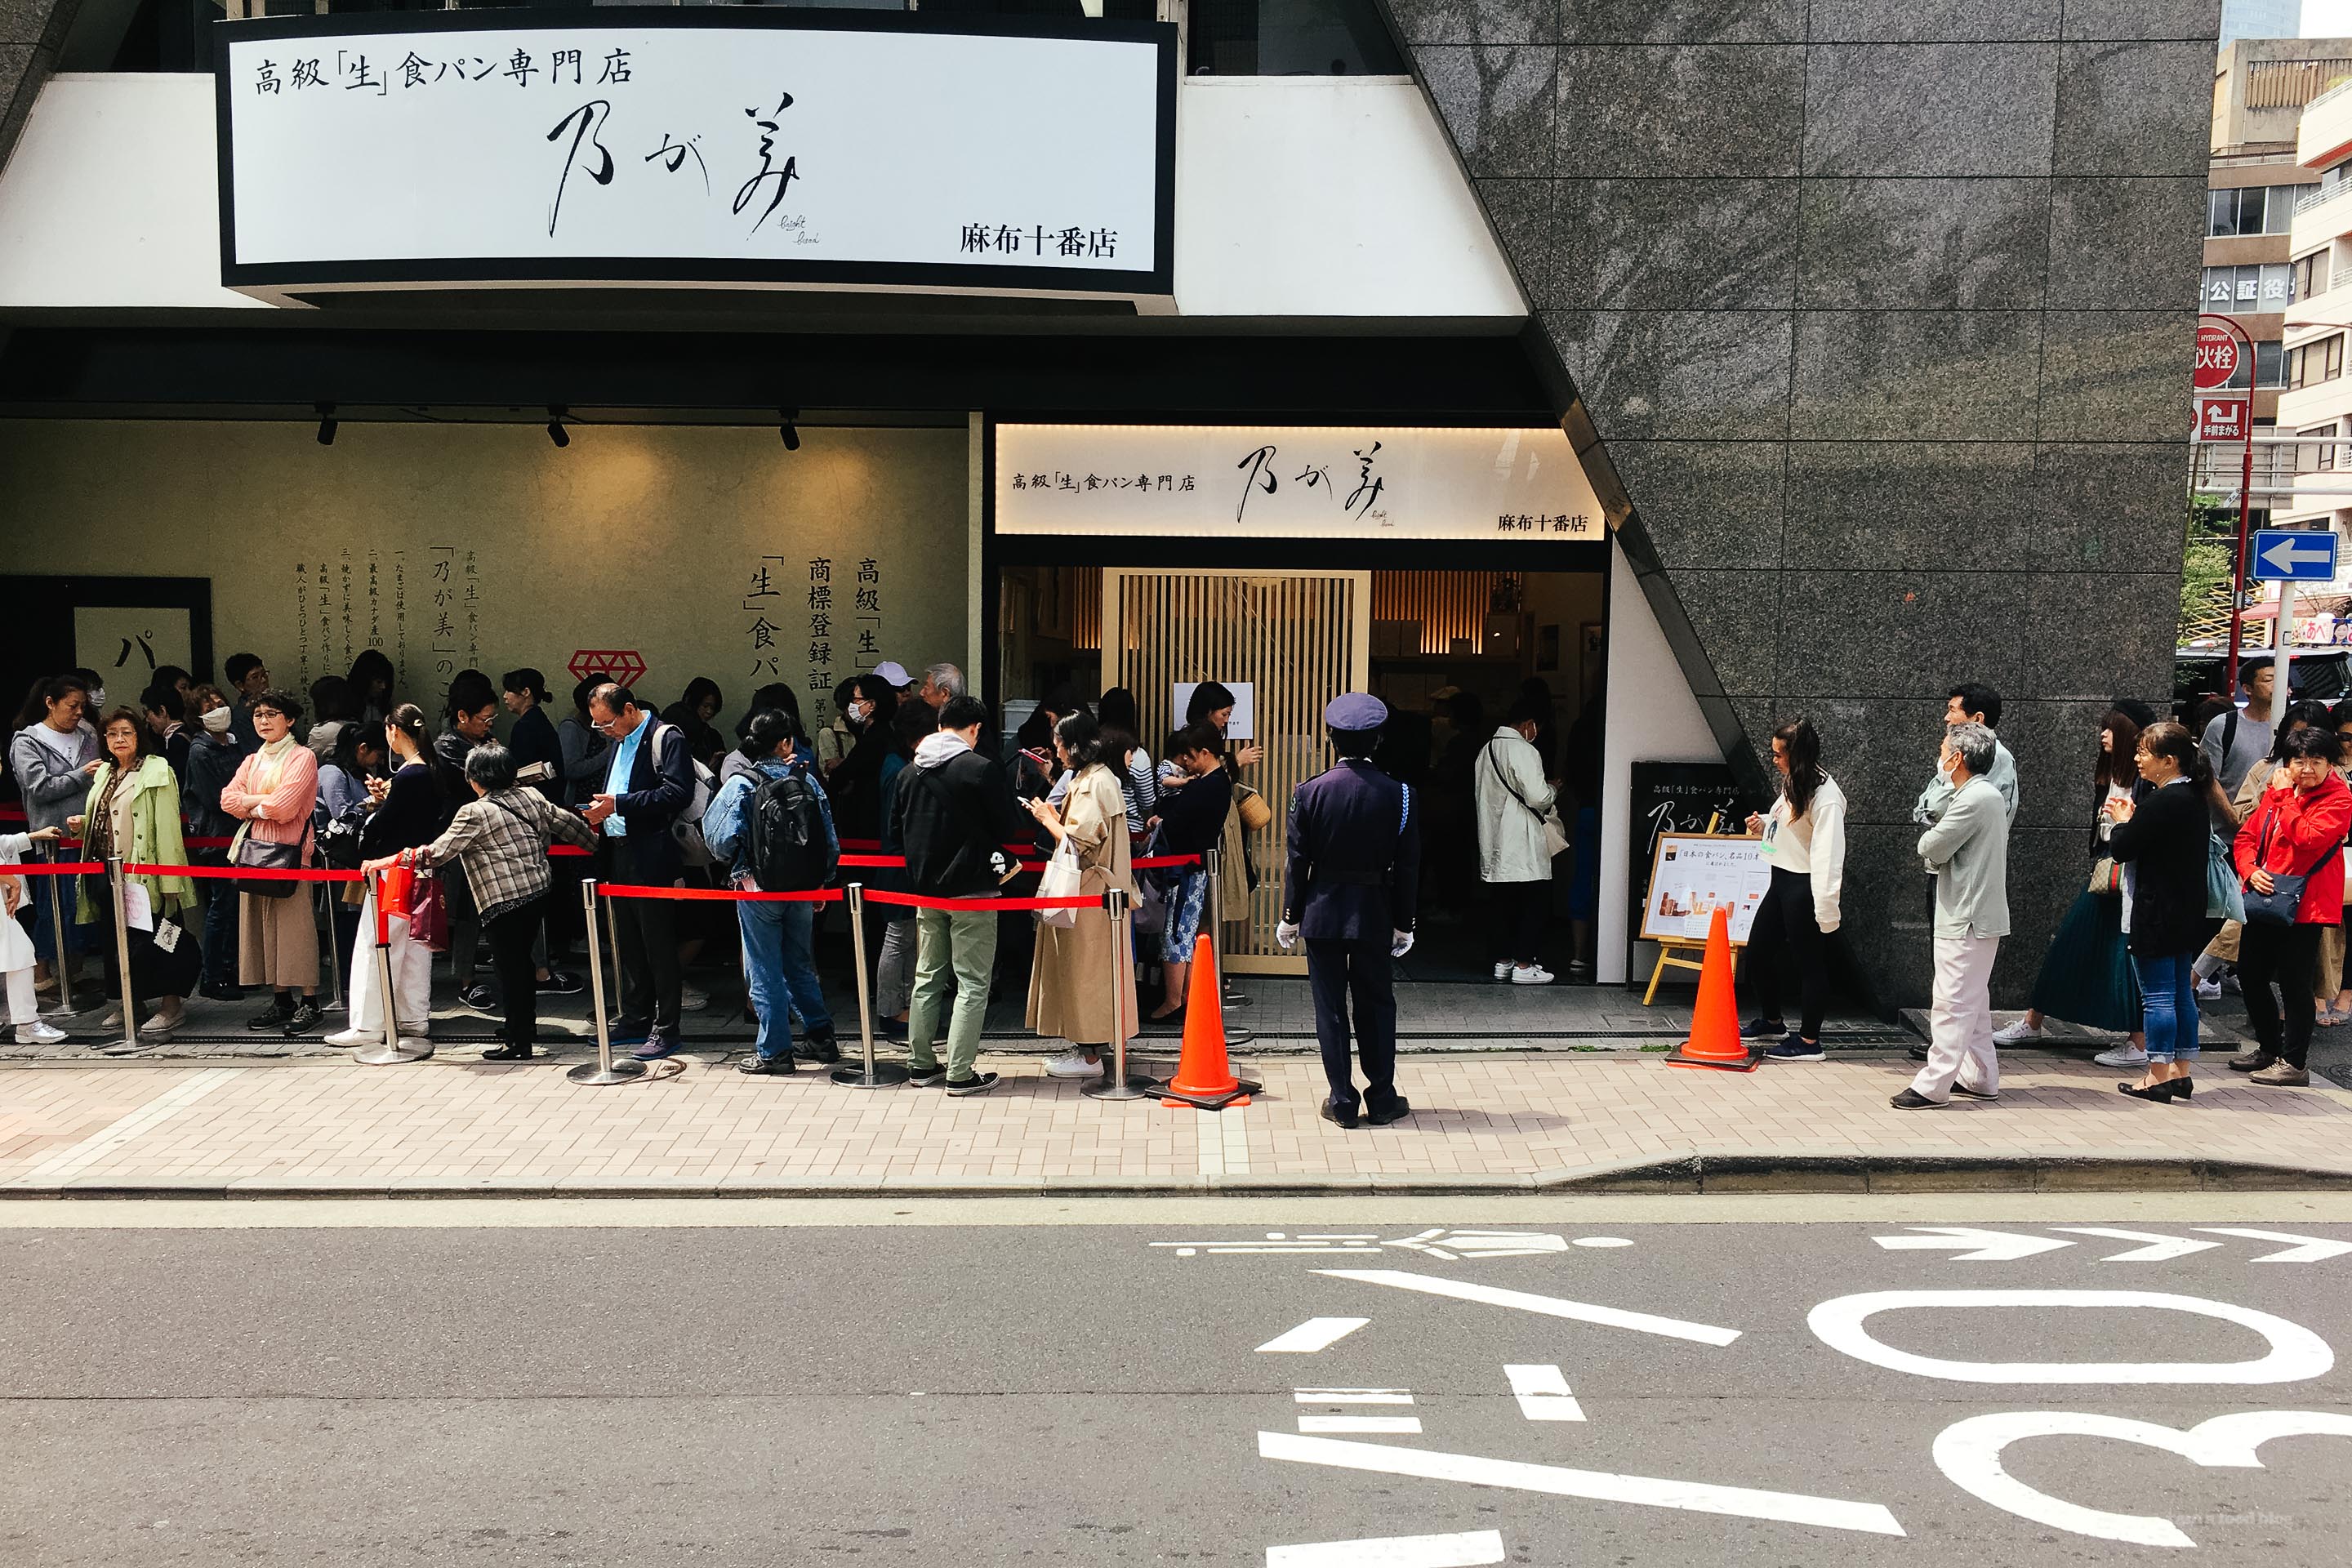 Japan’s Famous Nogami Shokupan Bread: People are Lining Up for Hours for this Fluffy White Bread | www.iamafoodblog.com